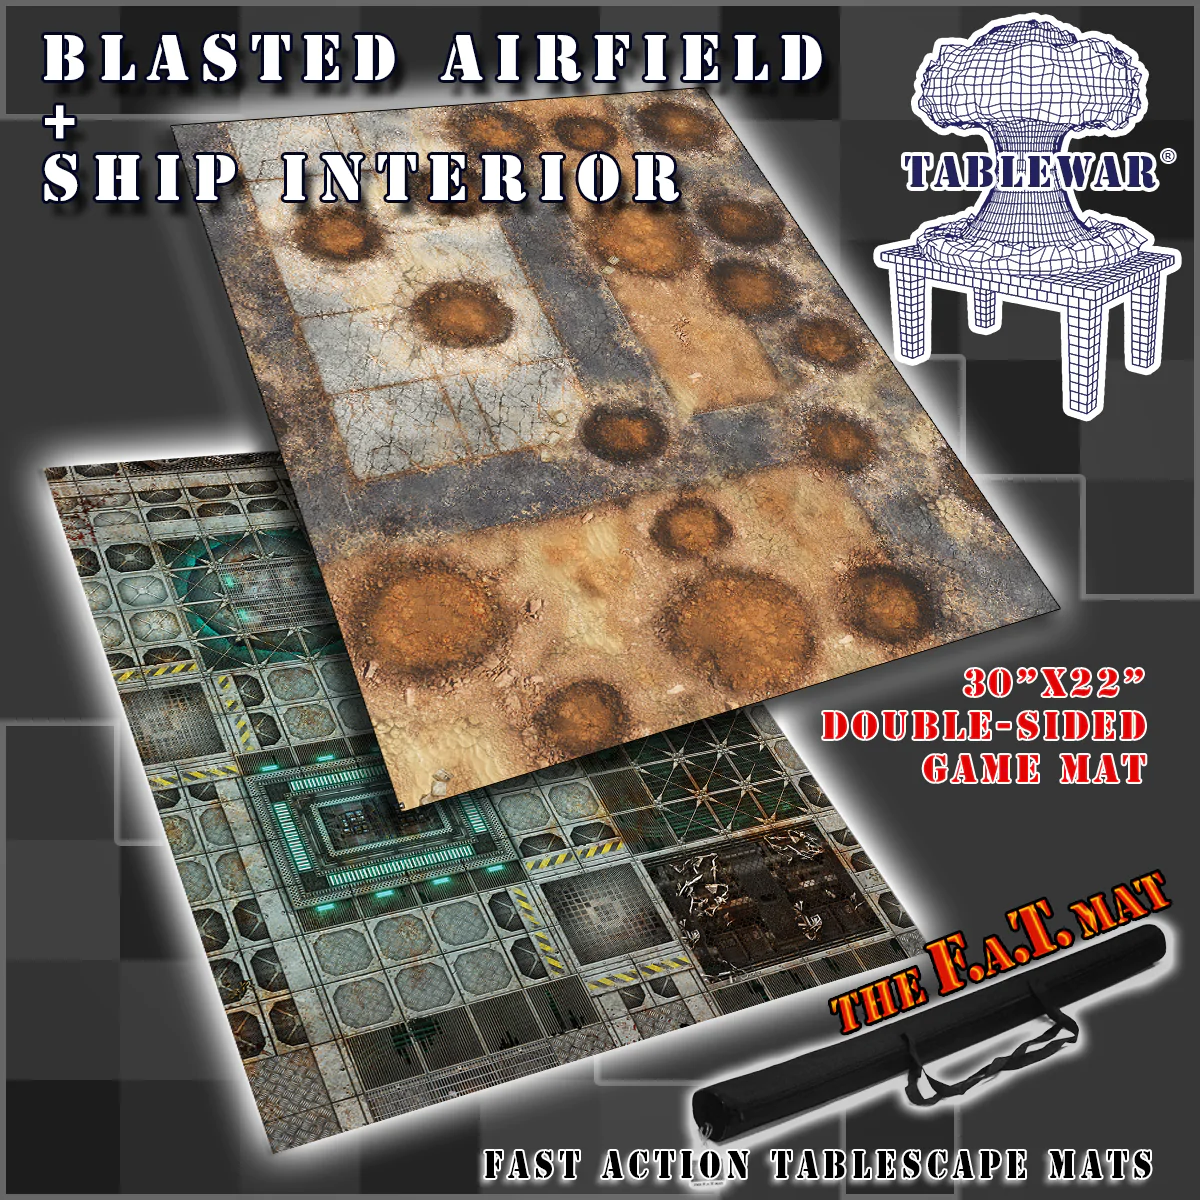 F.A.T. Mat, SHIP INTERIROR/BLASTED AIRFIELD 30"X22" Gaming Mat F.A.T. Mats    | Red Claw Gaming